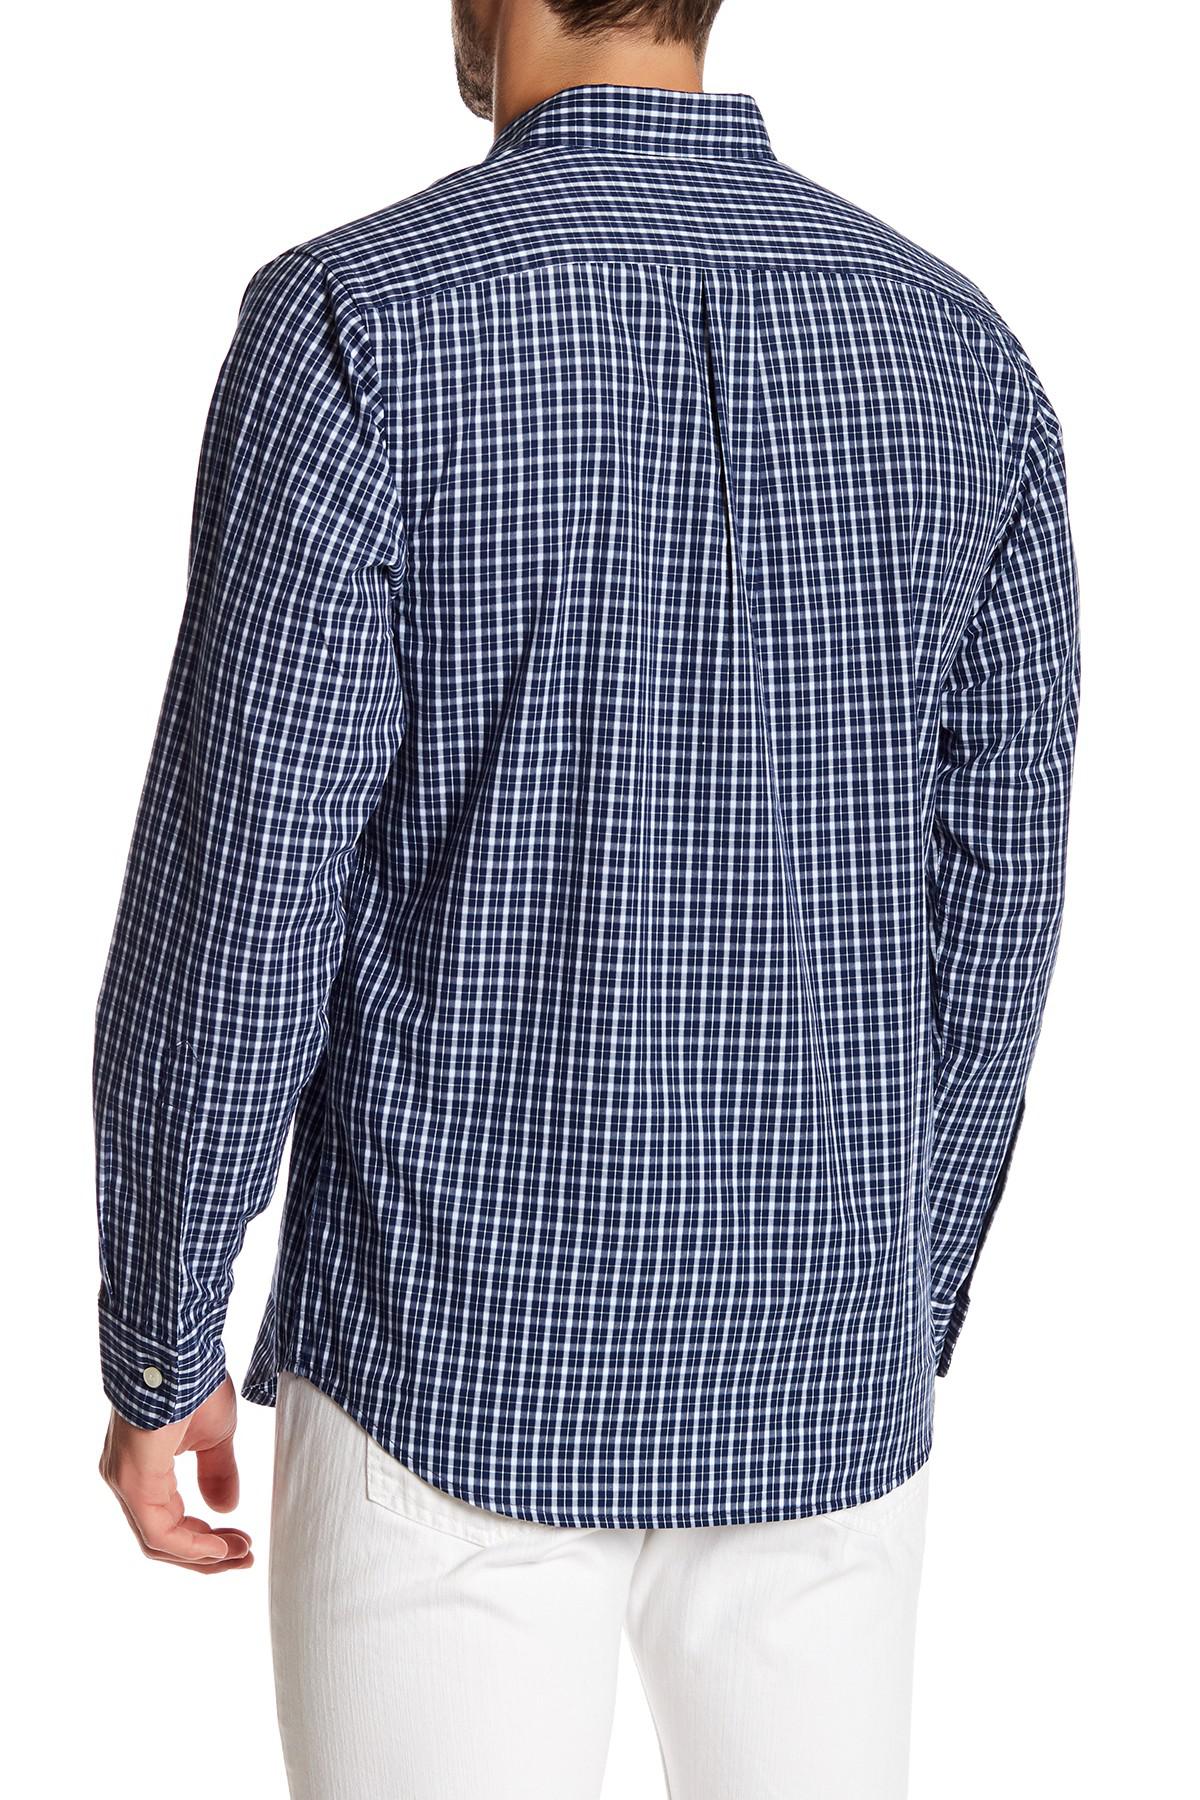 Lyst - Dockers Easy Casual Hamilton Long Sleeve Plaid Shirt in Blue for Men